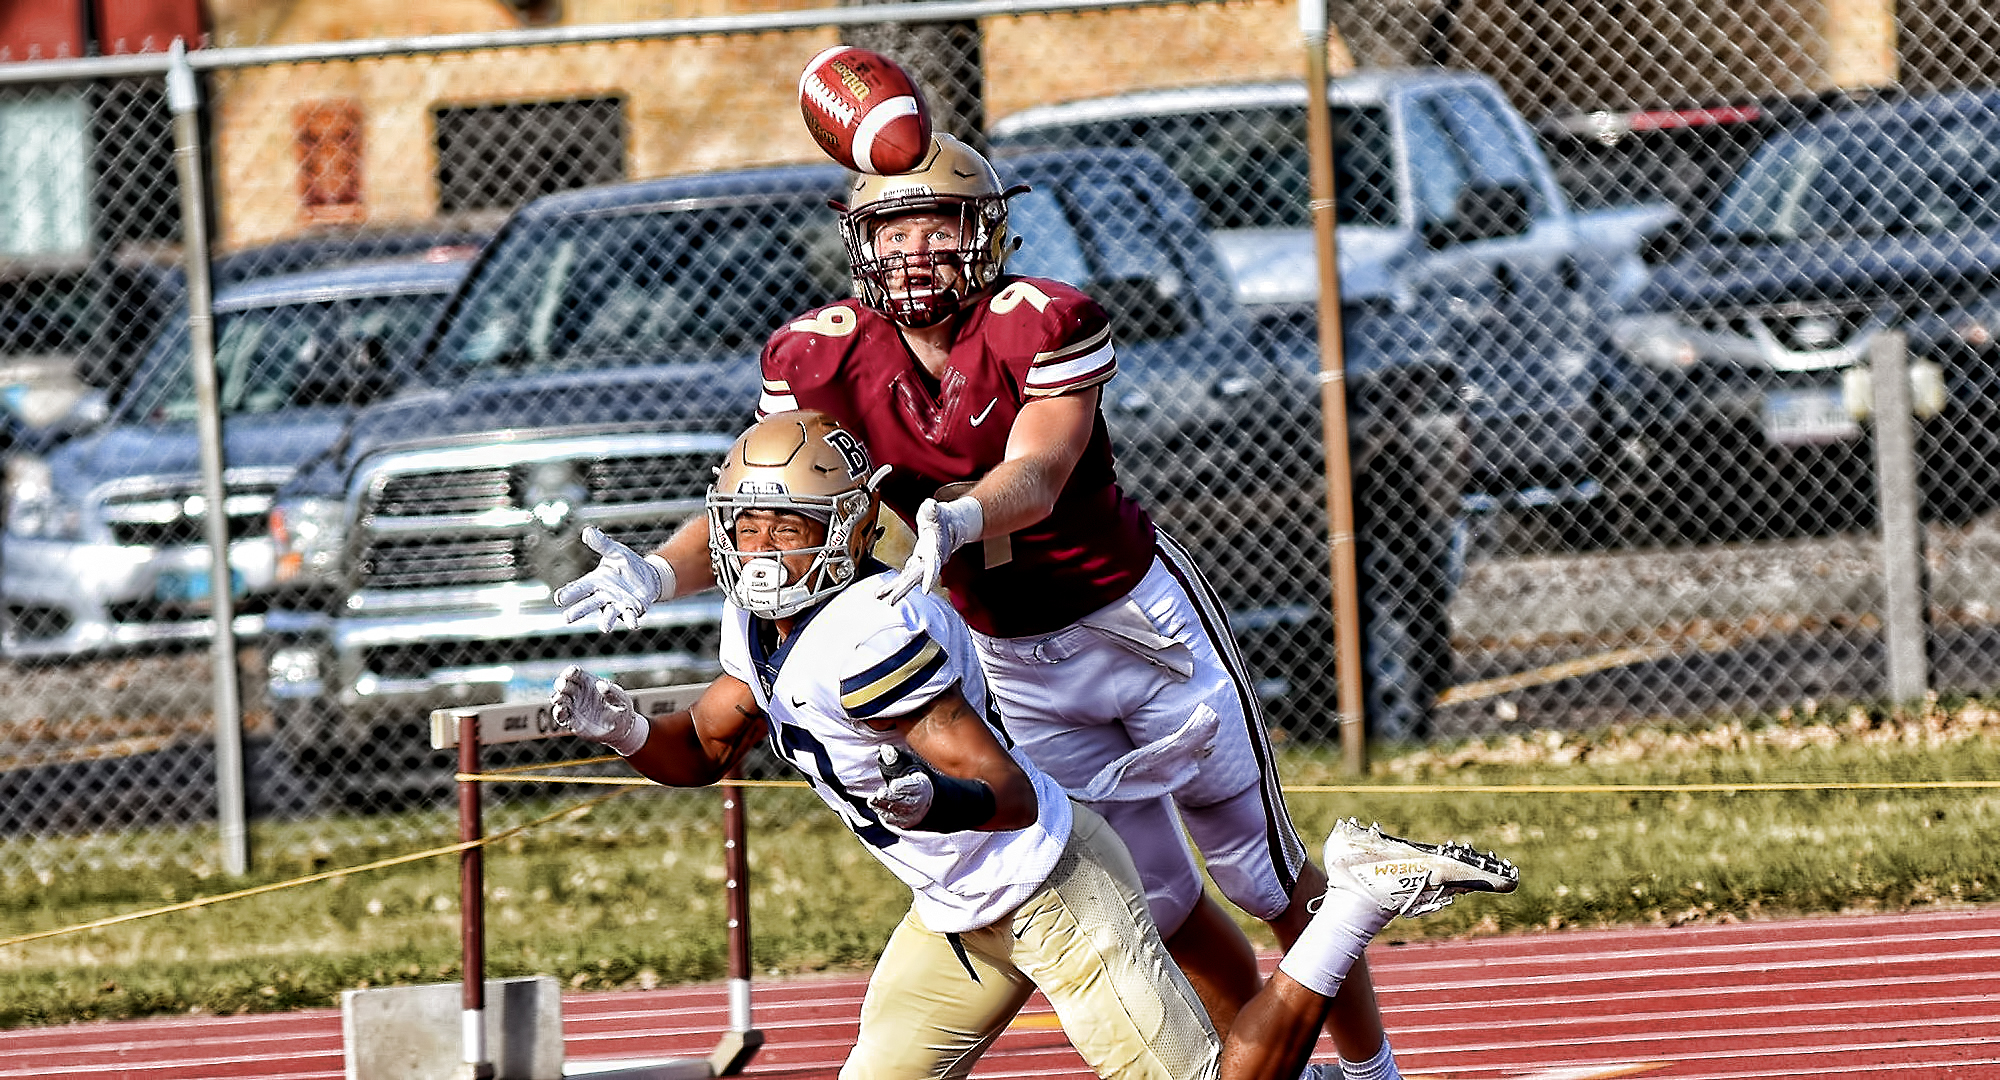 Senior Matt Bye goes over a Bethel defender to try and make a catch during the Cobbers' game with the Royals.